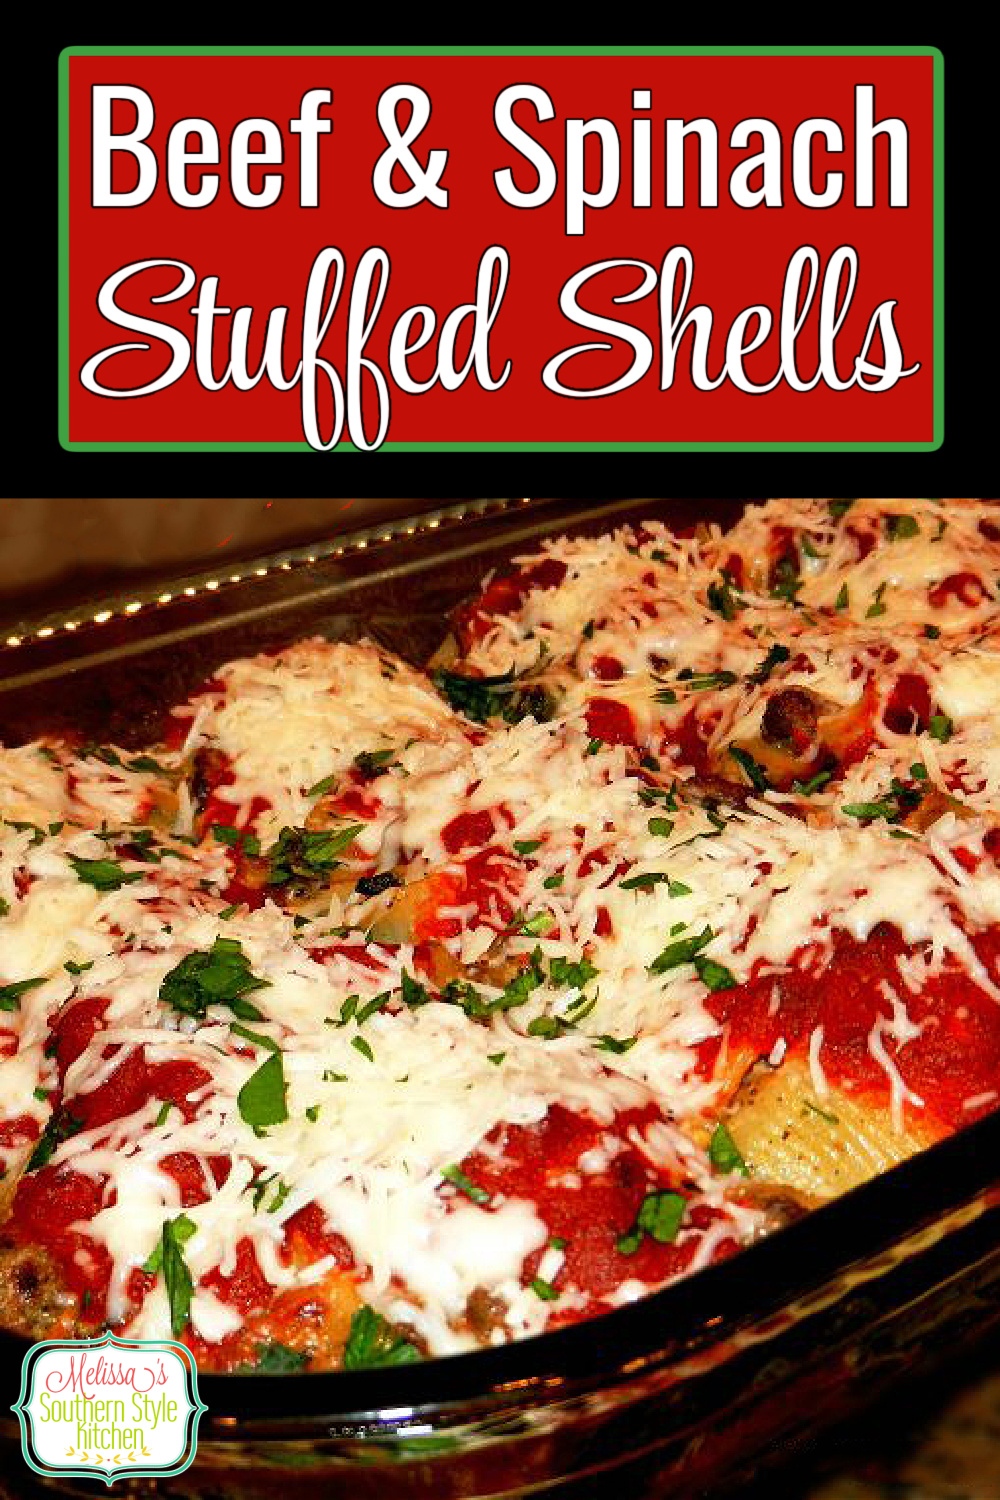 Create your own Italian feast at home with these Beef and Spinach Stuffed Shells #stuffedshells #easygroundbeefrecipes #beefstuffedshells #pasta #Italianfood #beefandspinachstuffedshells #dinner #dinnerideas #beef #easyrecipes #spinach #southernfood #southernrecipes via @melissasssk